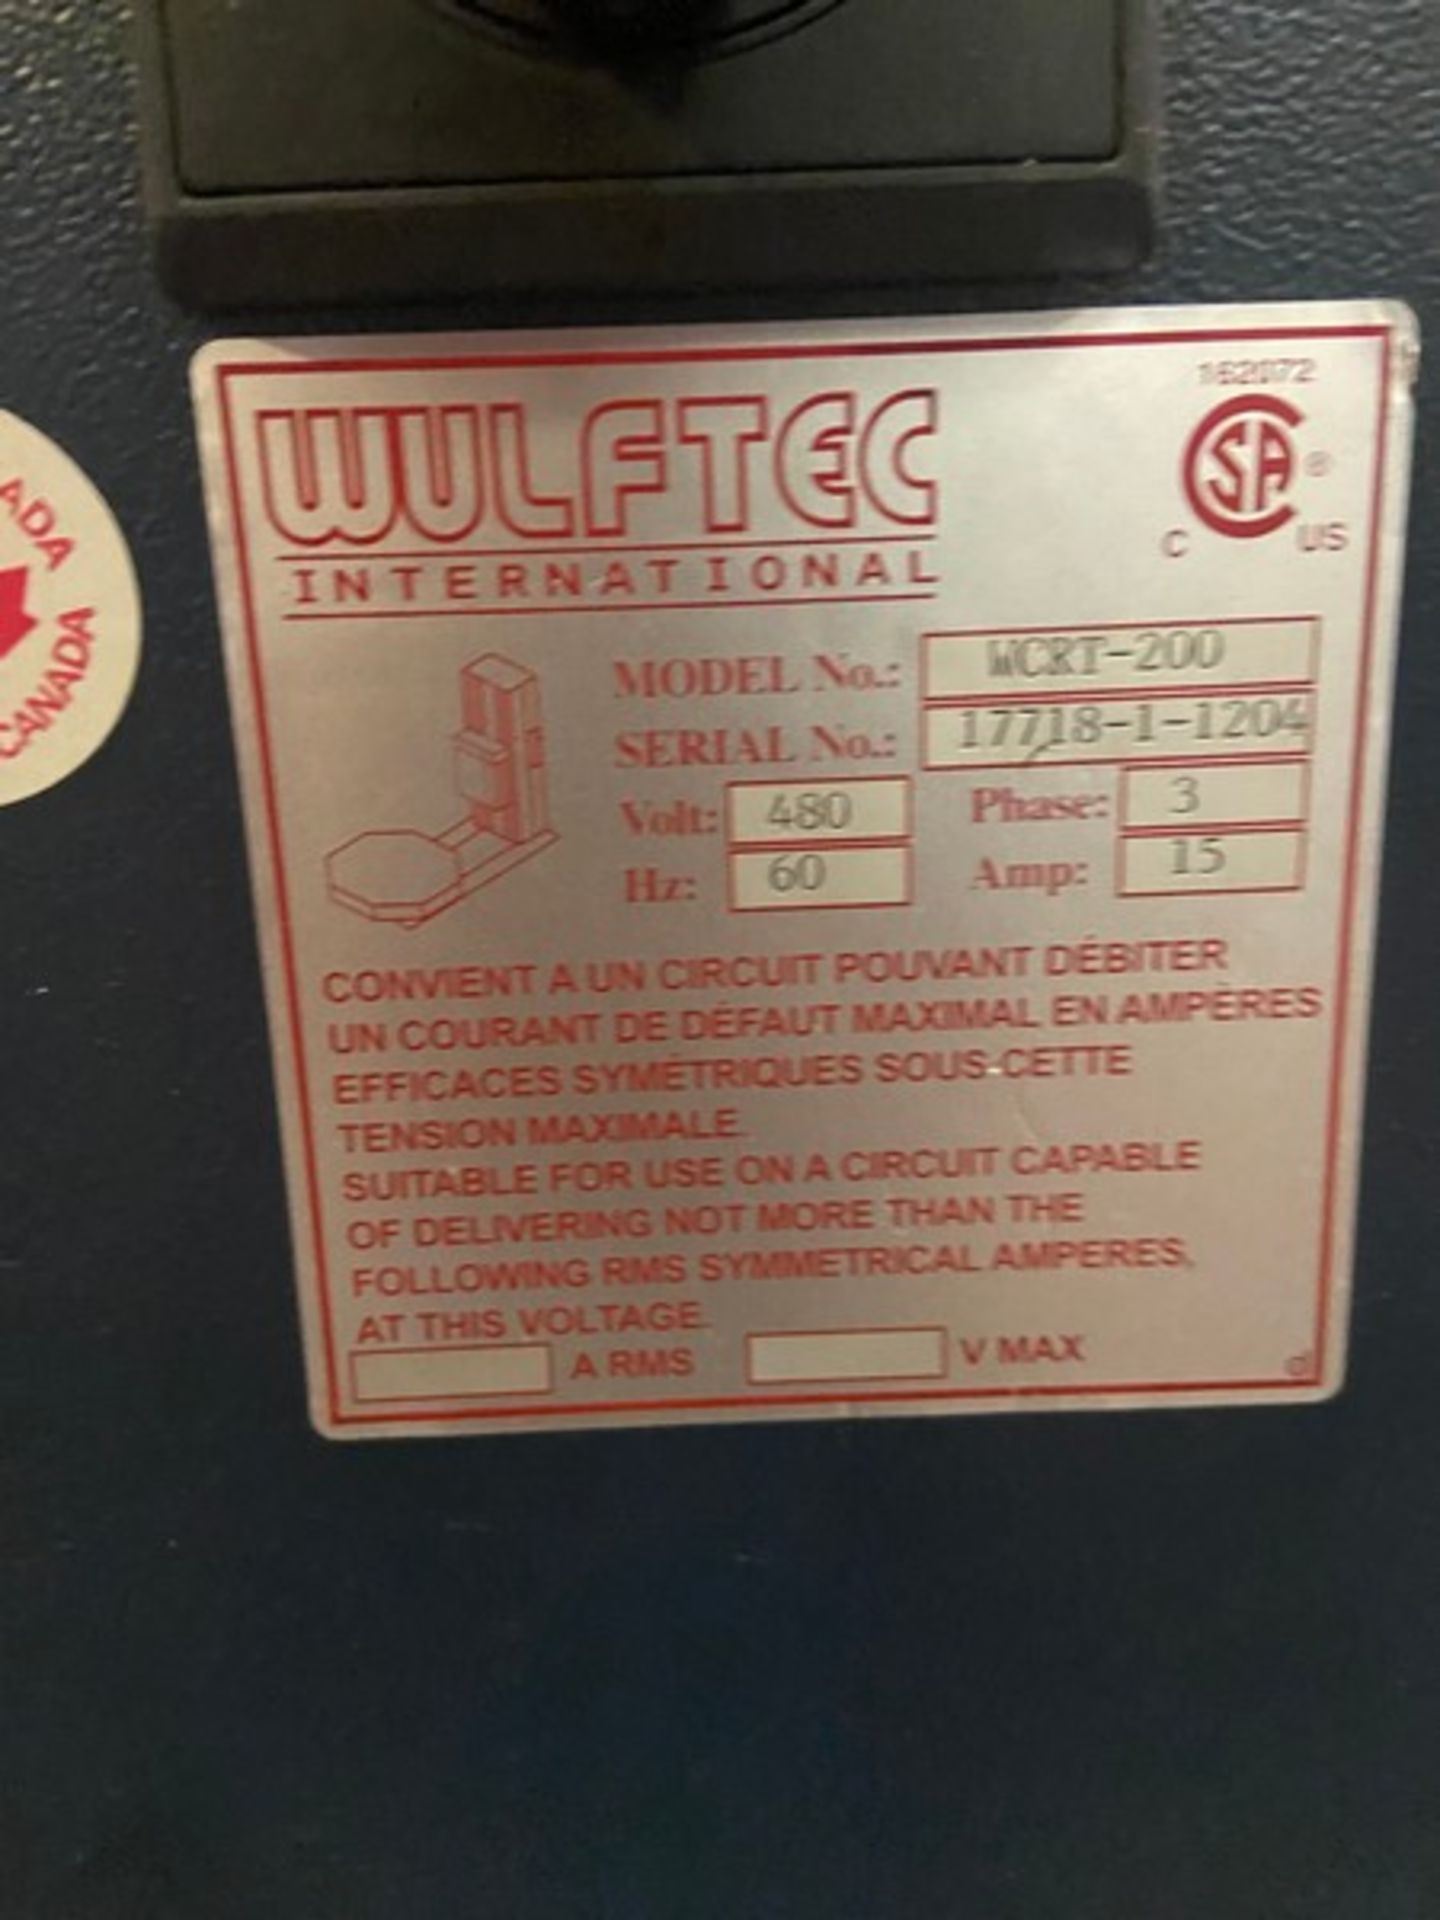 Wulftec International Stretch Wrapper, M/N WCRT-200, S/N 17718-1-1204, 480 Volts, 3 Phase, with - Image 6 of 10